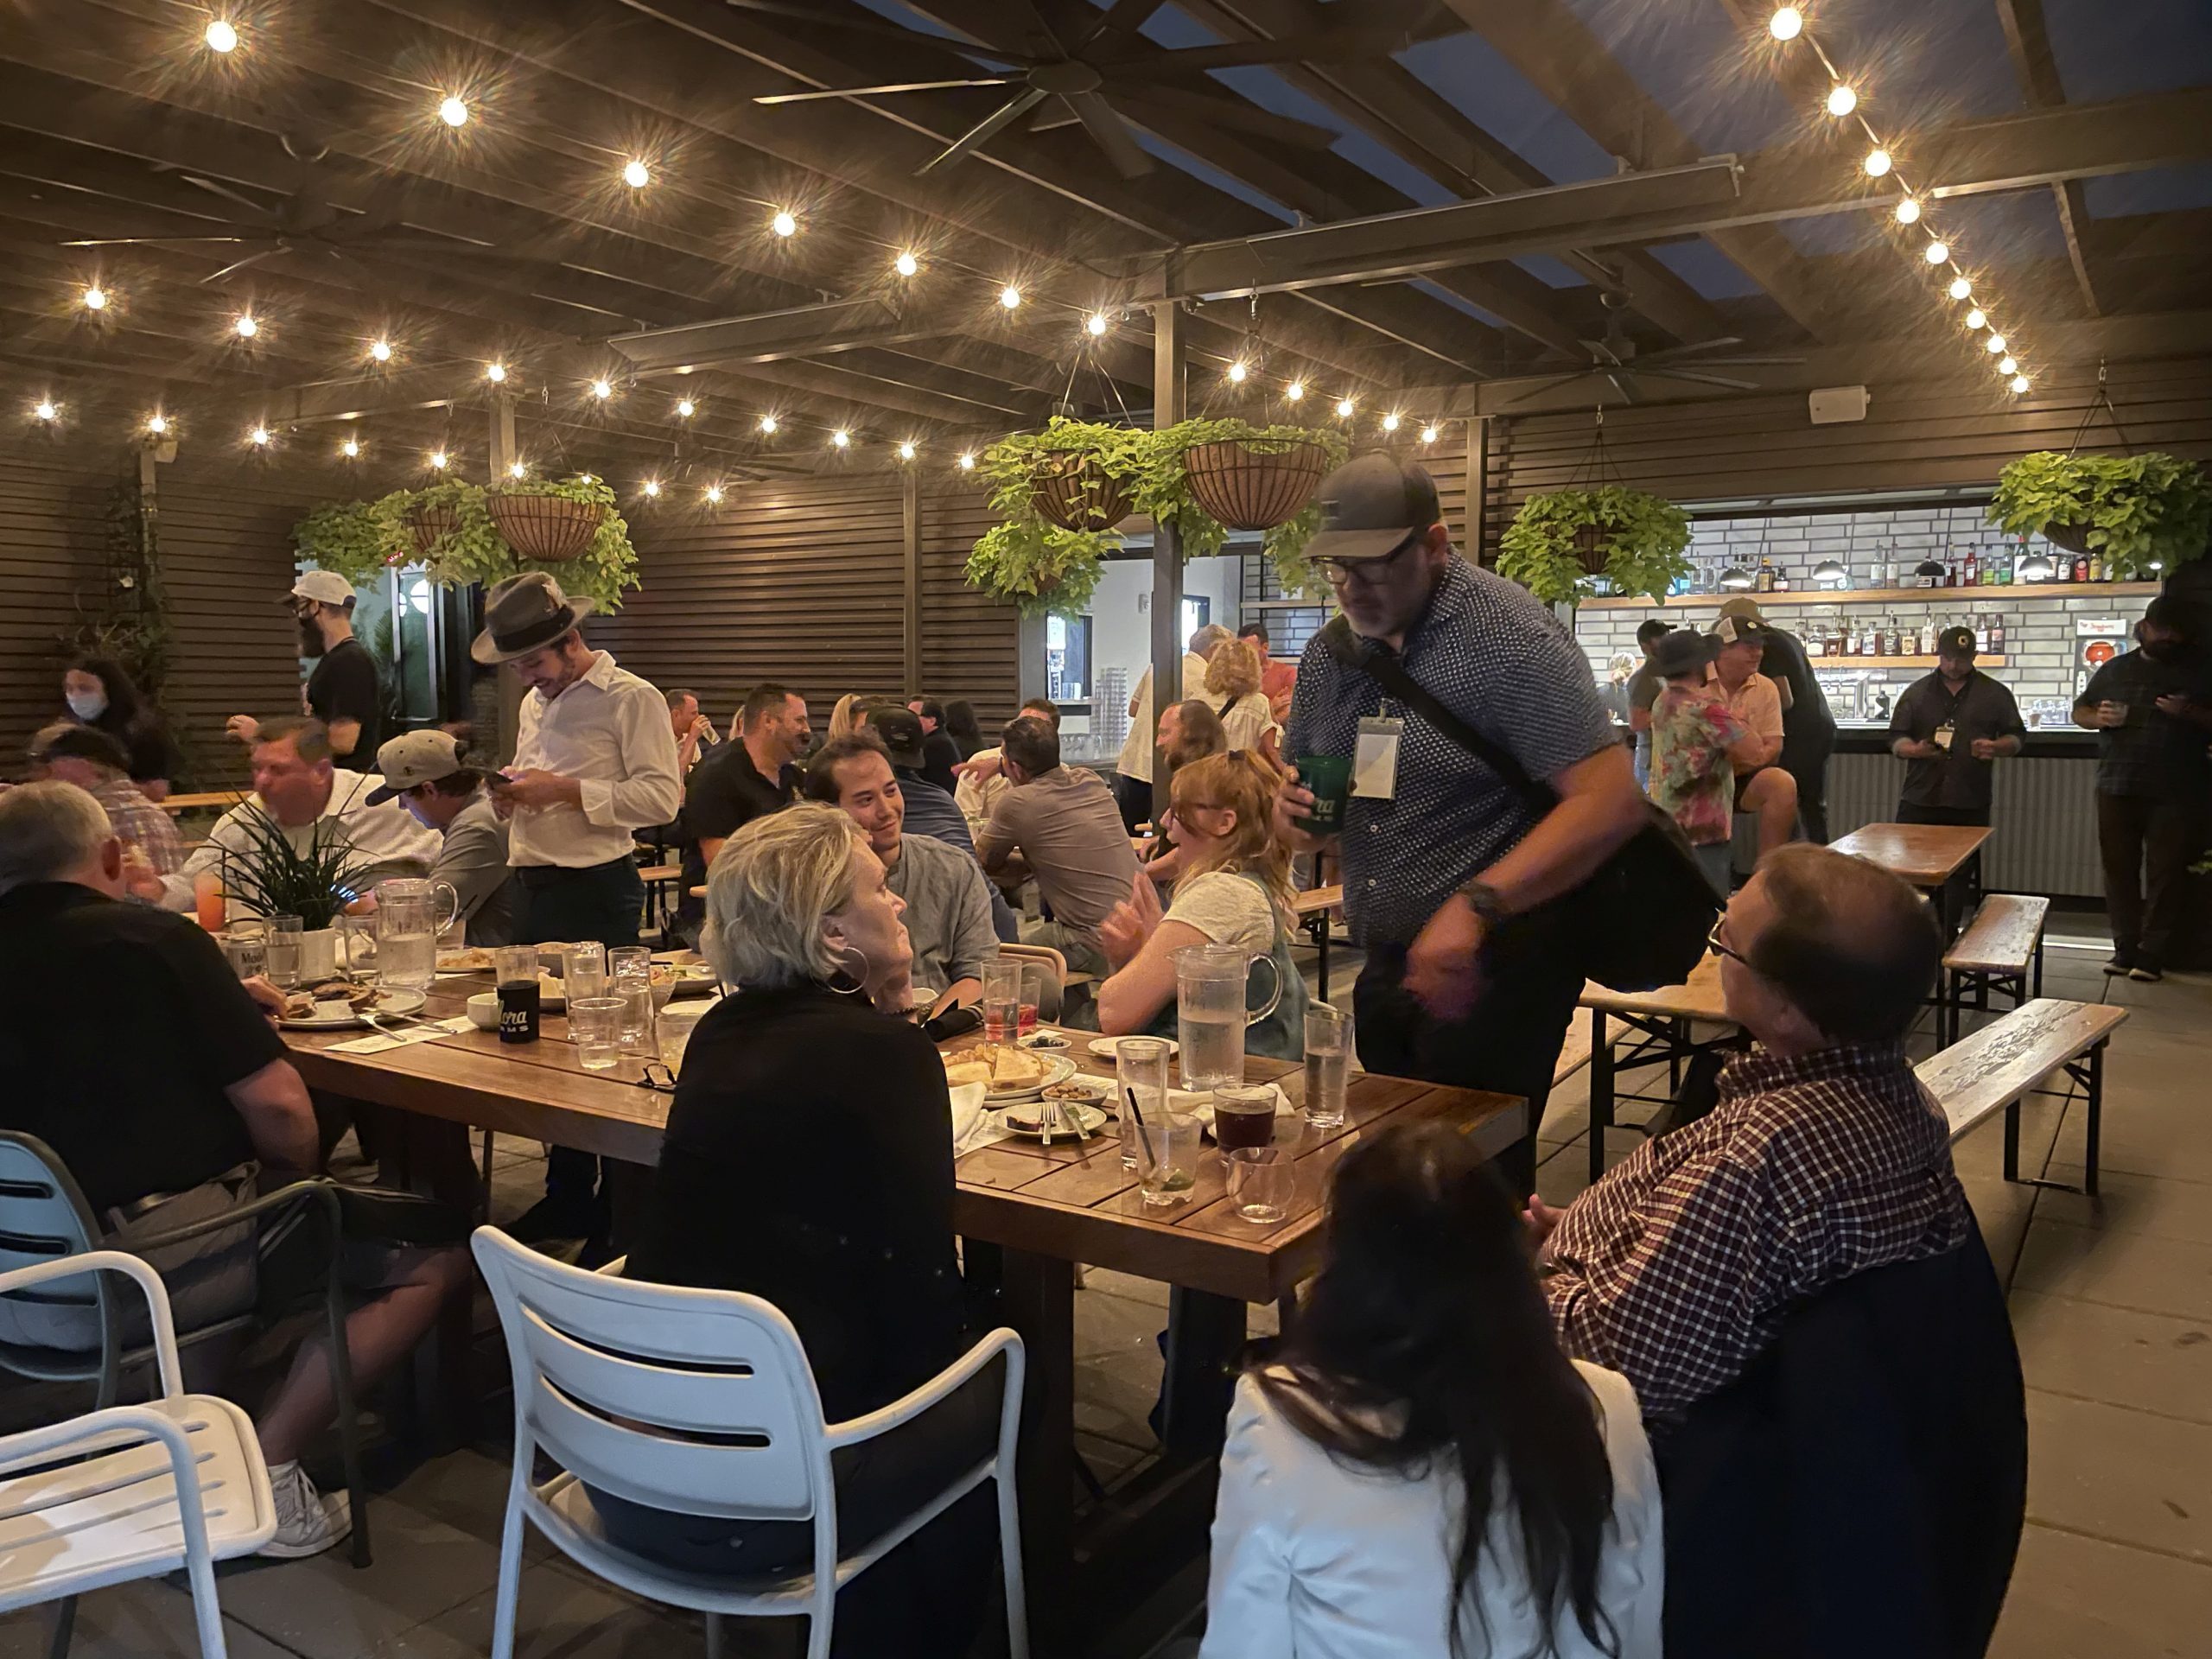 Members of the medical marijuana industry of Missouri share a meal and community at Percheron Rooftop Bar, hosted by Flora Farms